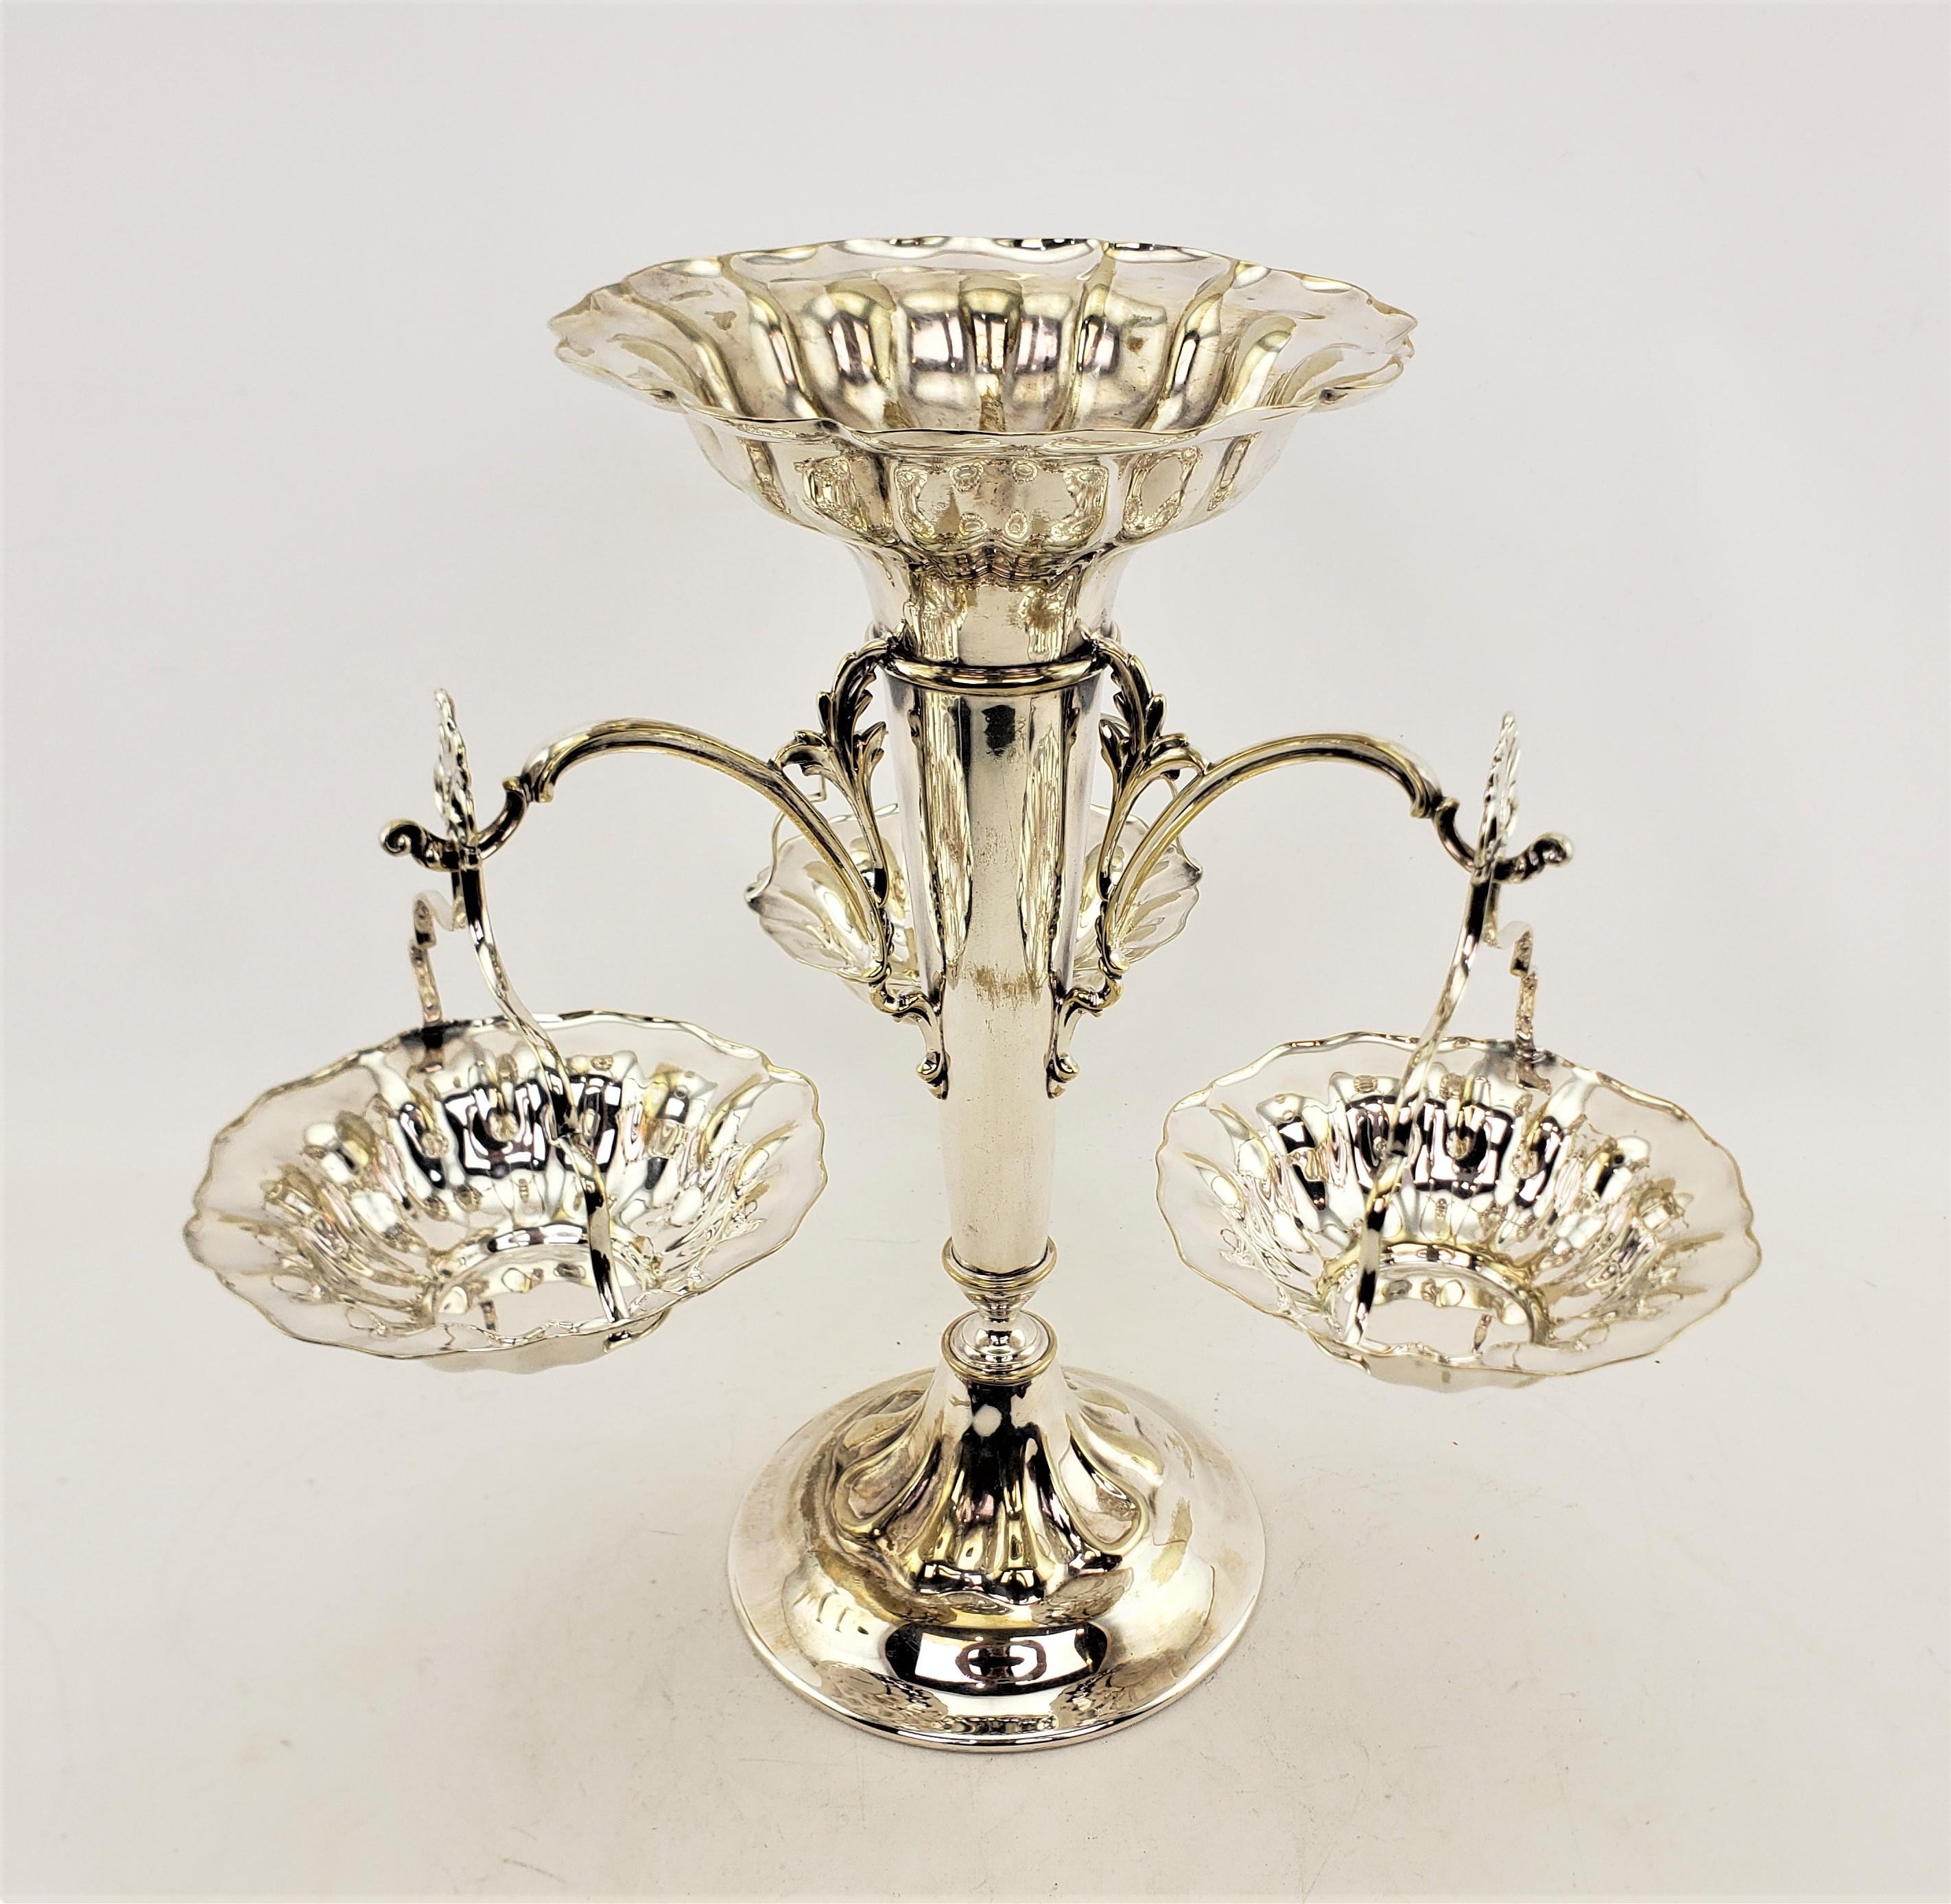 Late Victorian Antique English Elkington Silver Plated Epergne or Centerpiece with Side Baskets For Sale